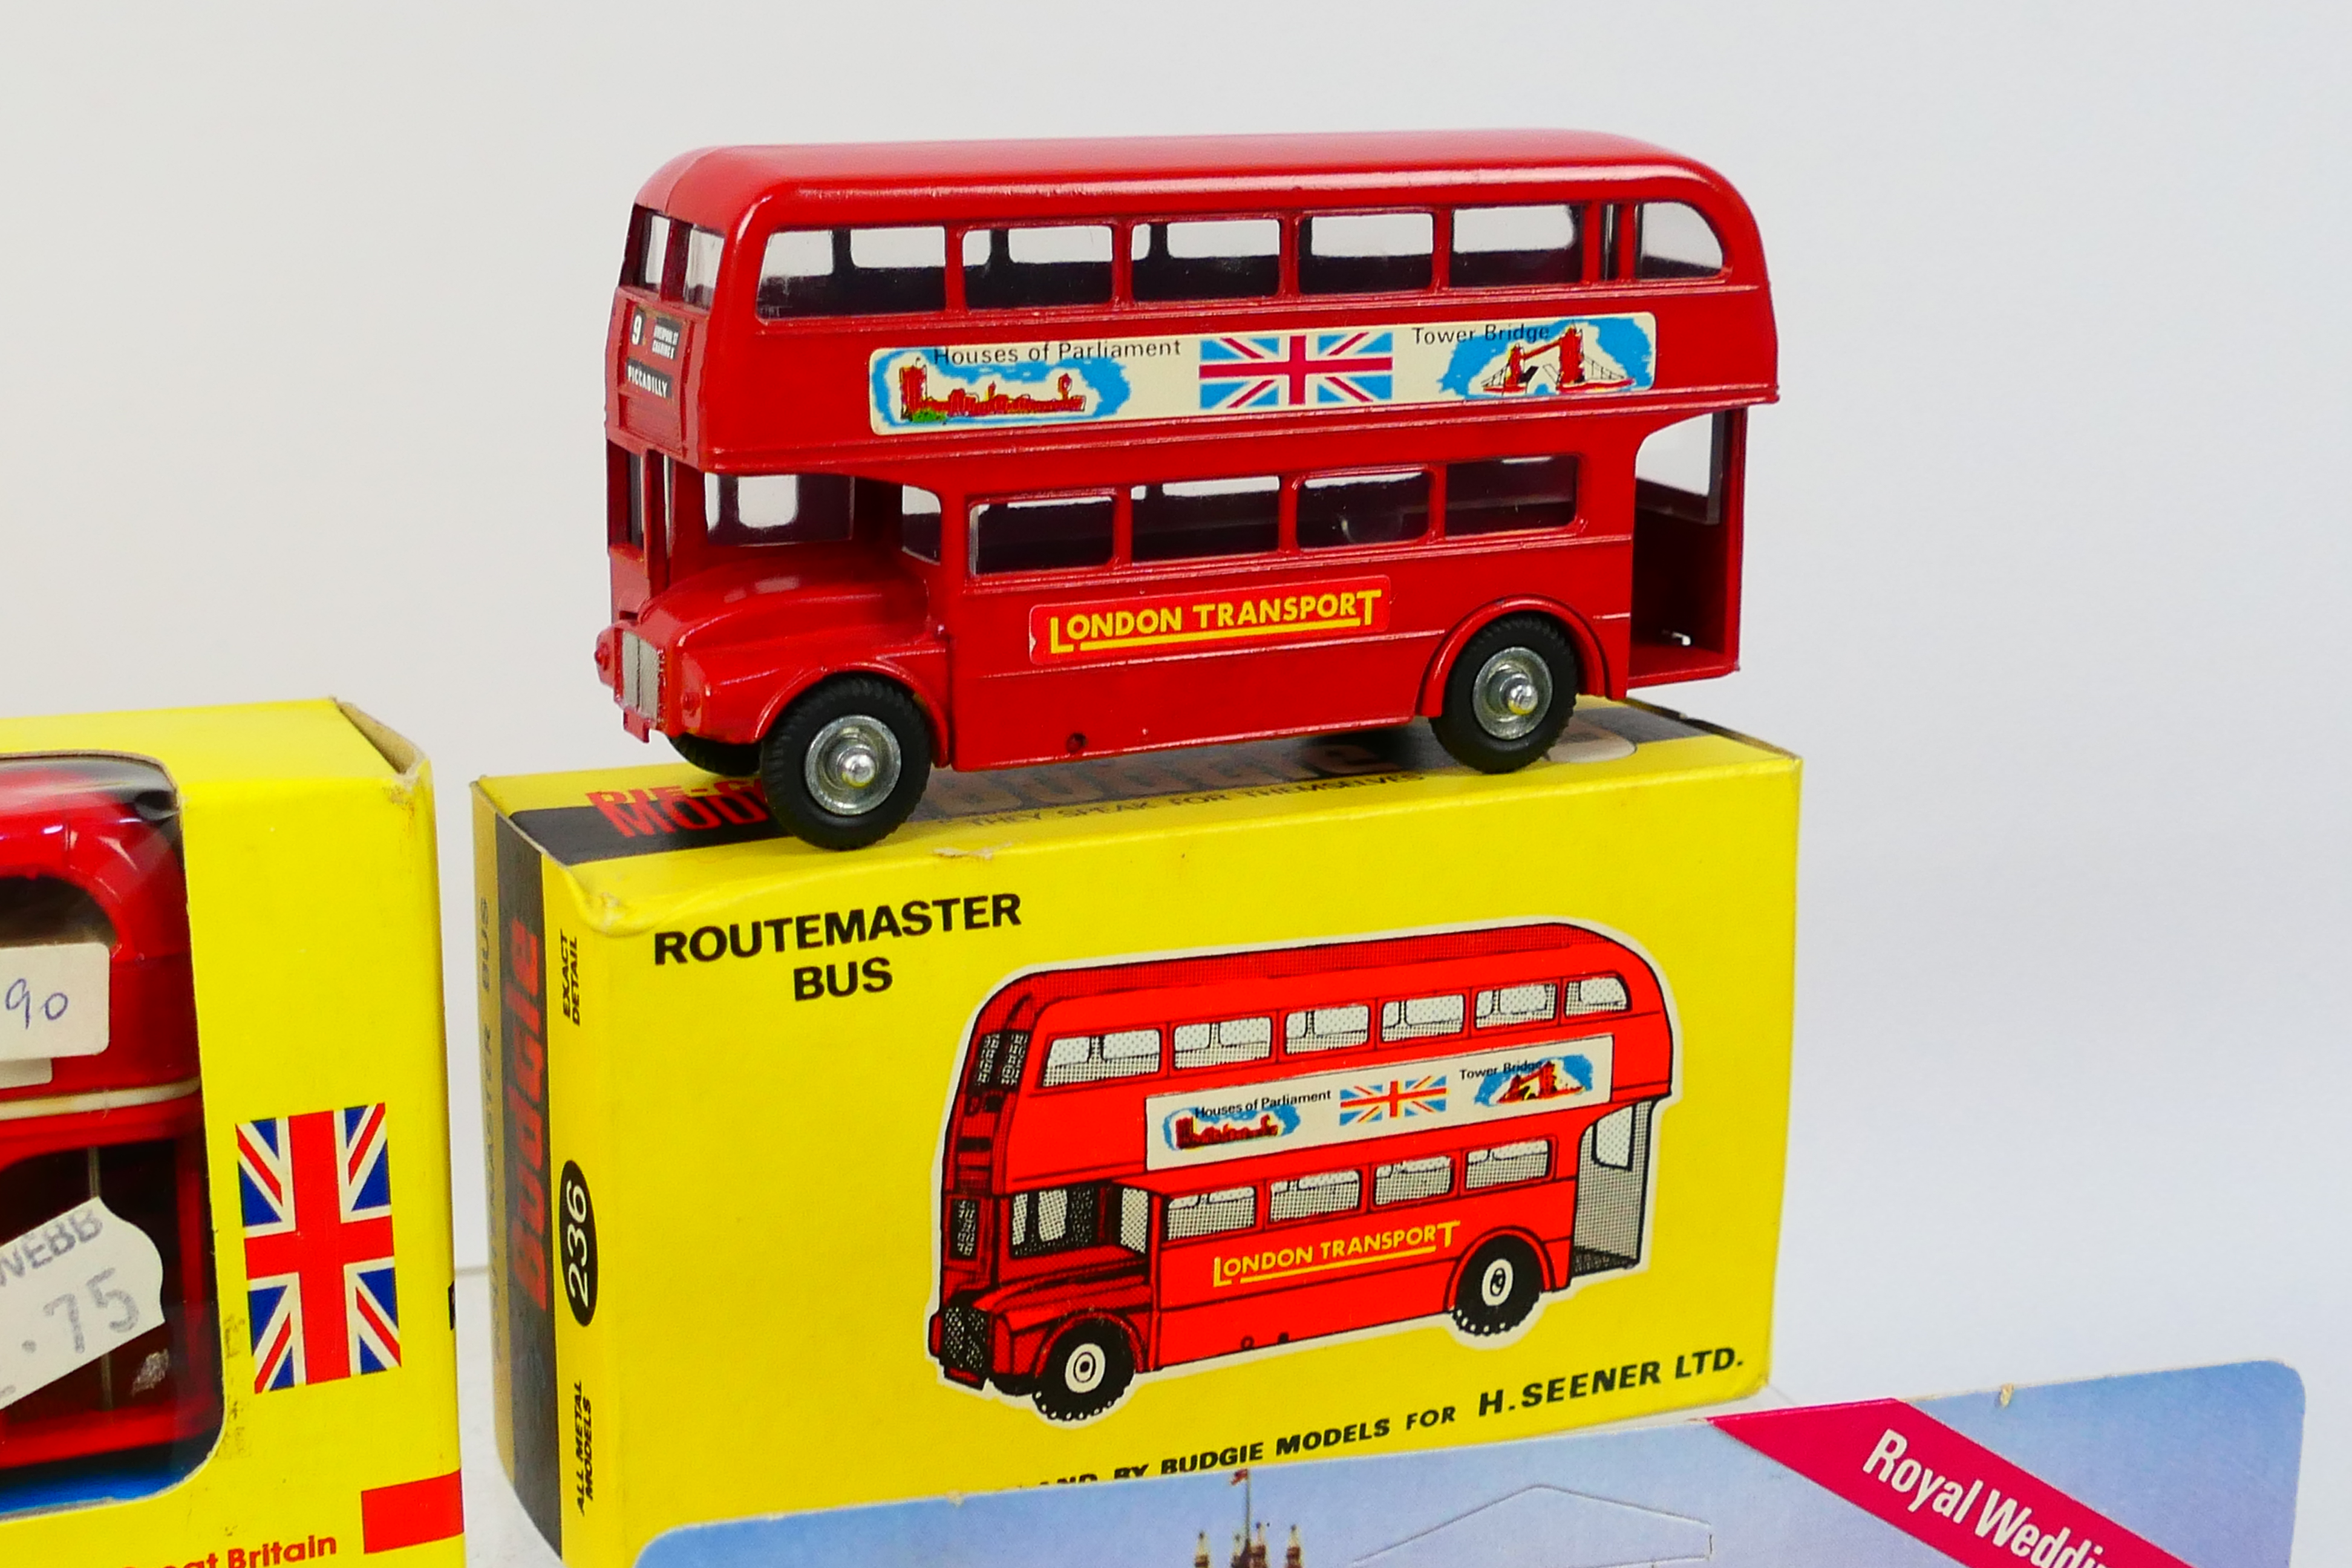 Budgie Toys - Lone Star - Seerol - Four boxed vintage diecast model buses, - Image 2 of 2